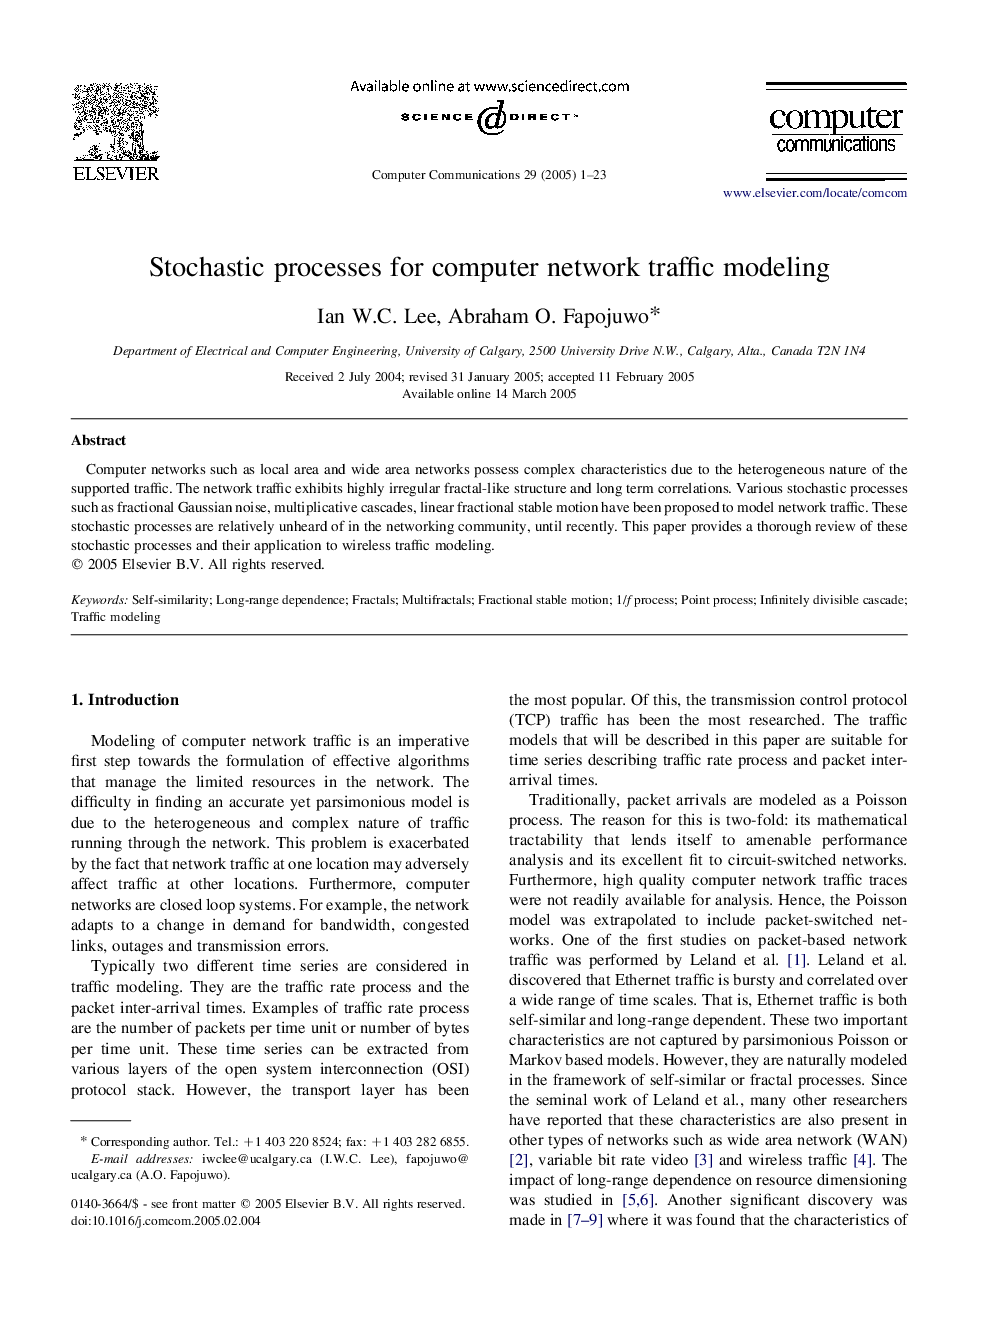 Stochastic processes for computer network traffic modeling